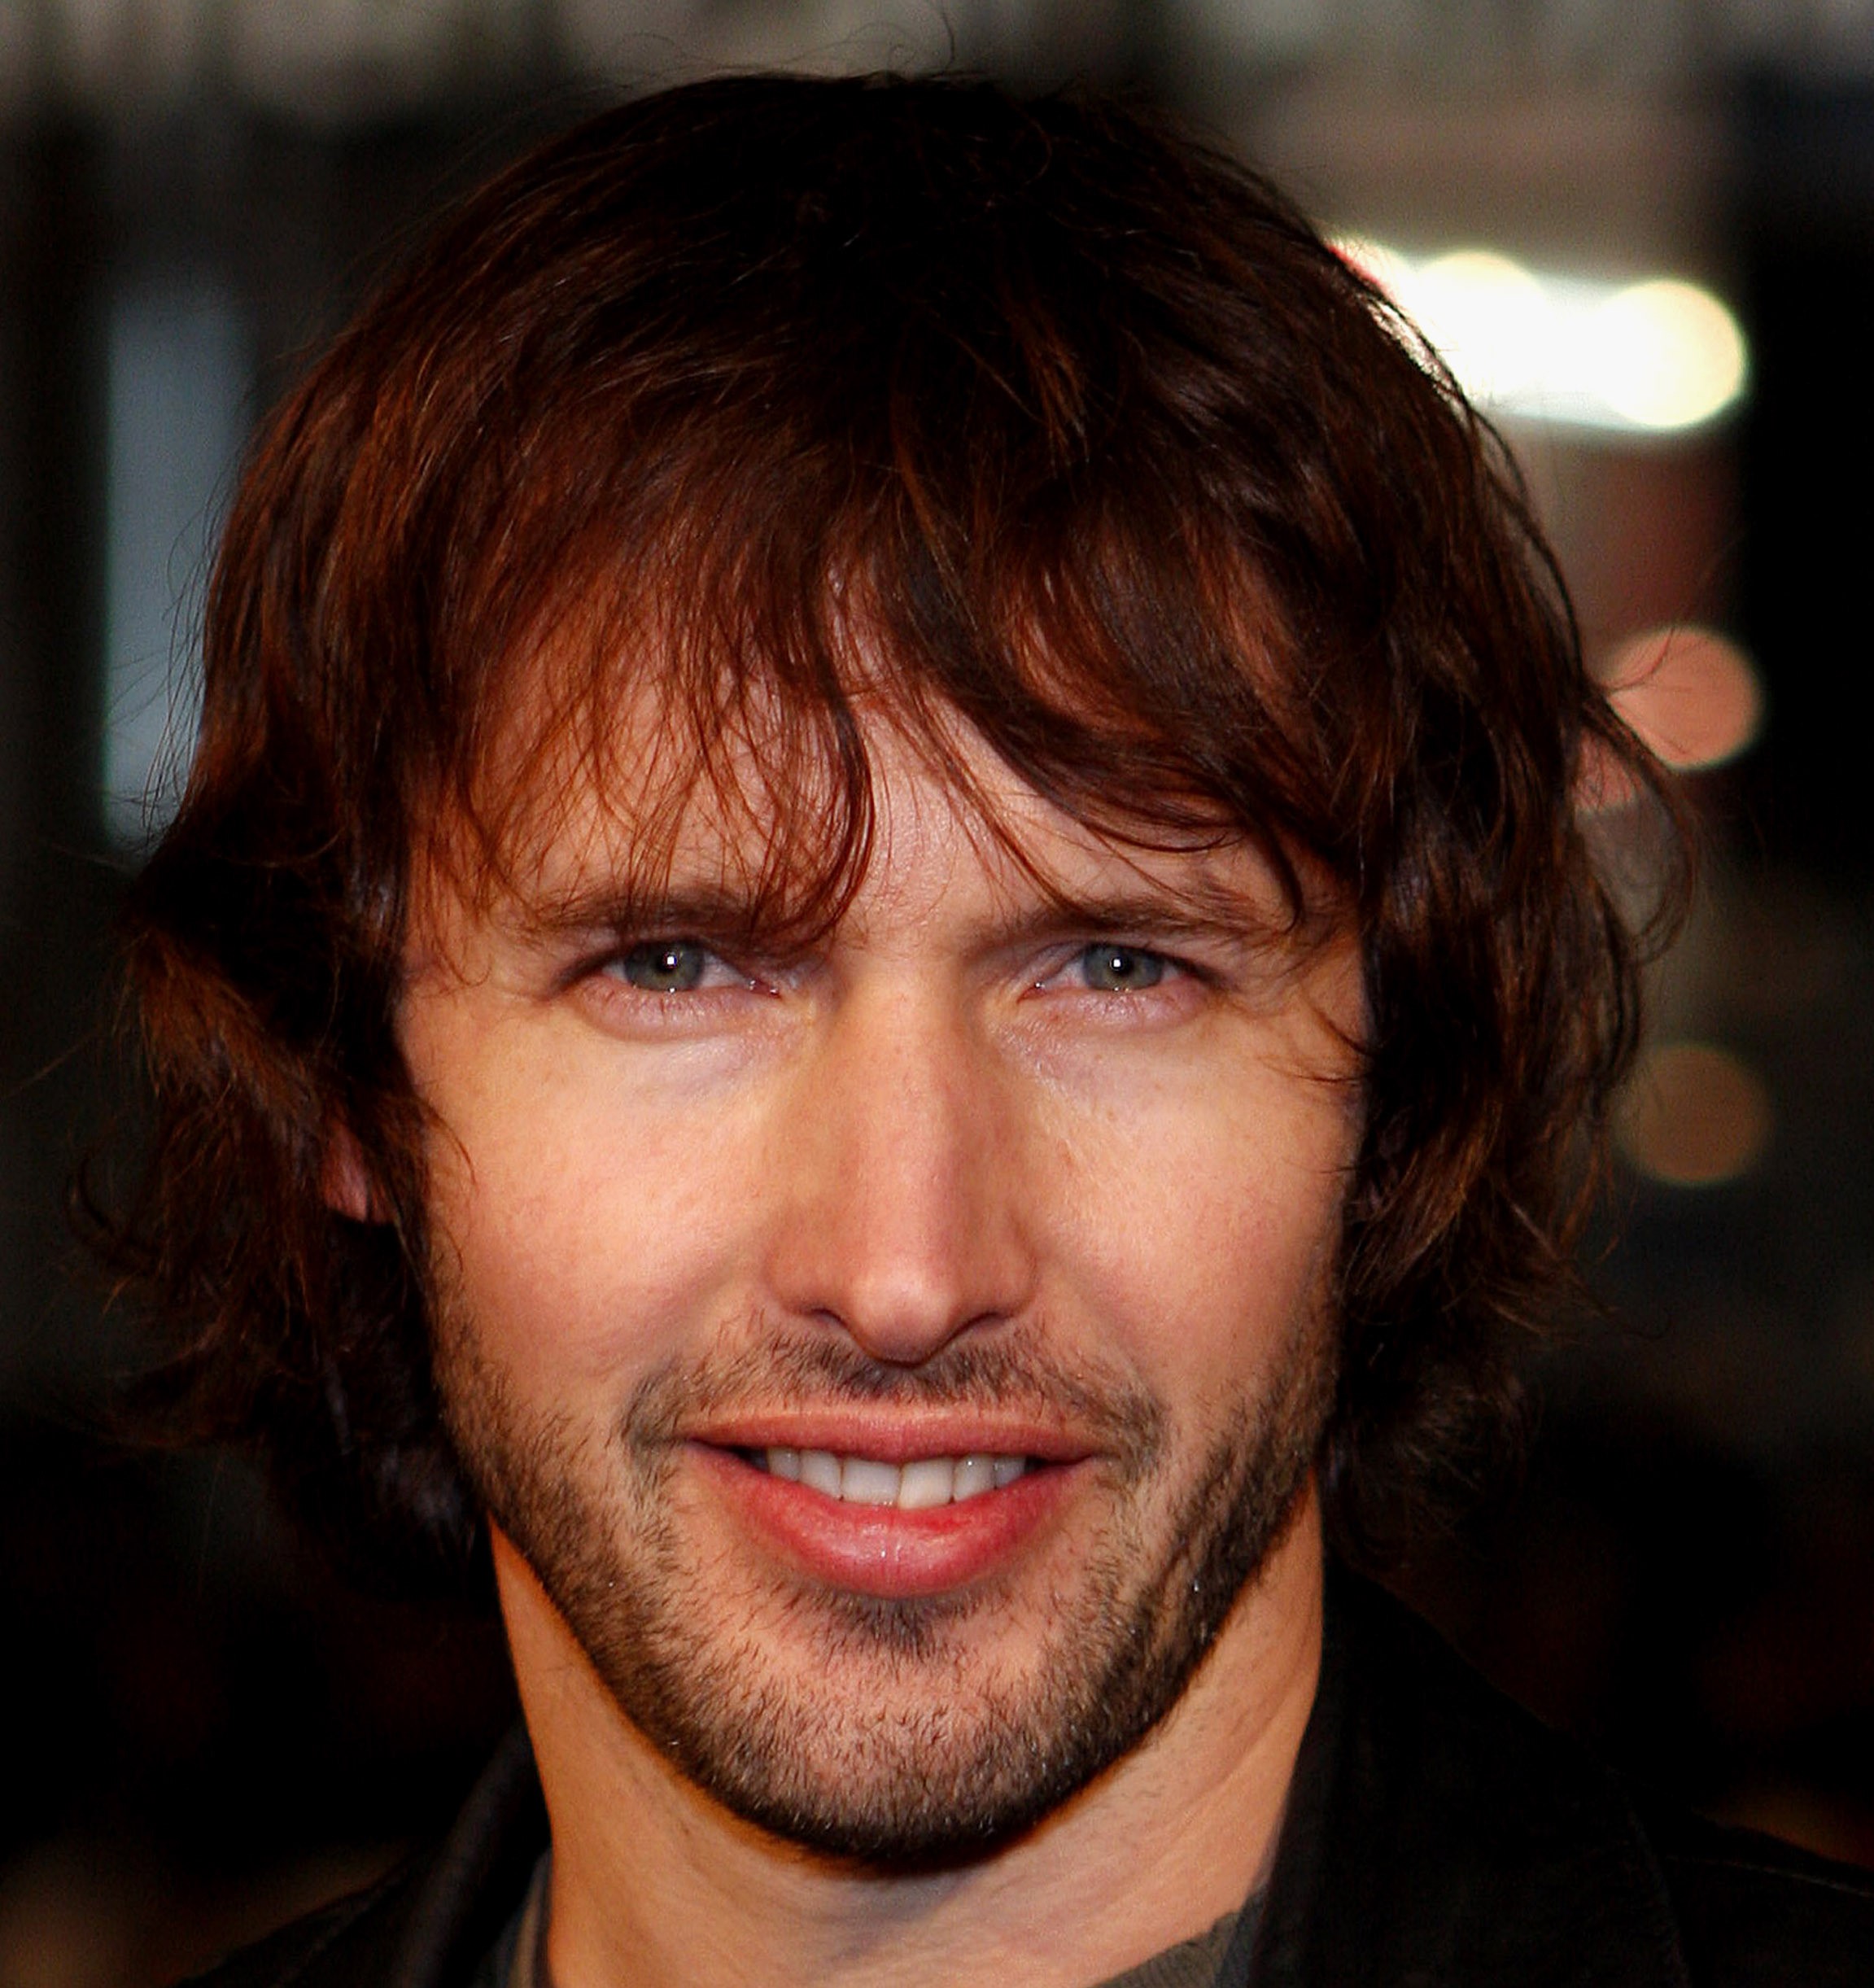 You are currently viewing Urodziny: James Blunt (22.02)